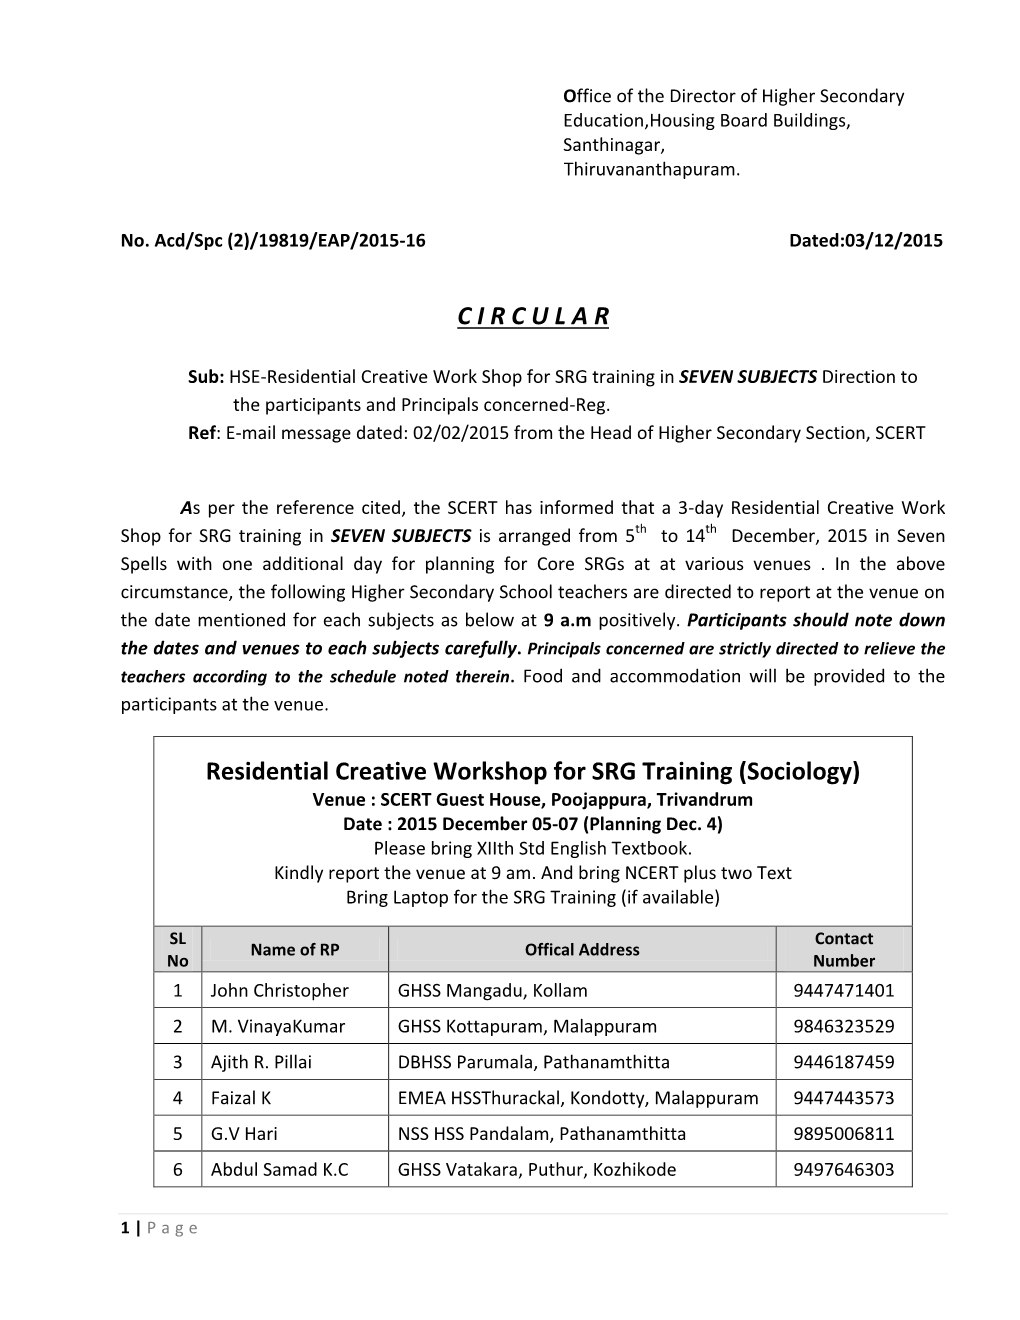 CIRCULAR Residential Creative Workshop for SRG Training